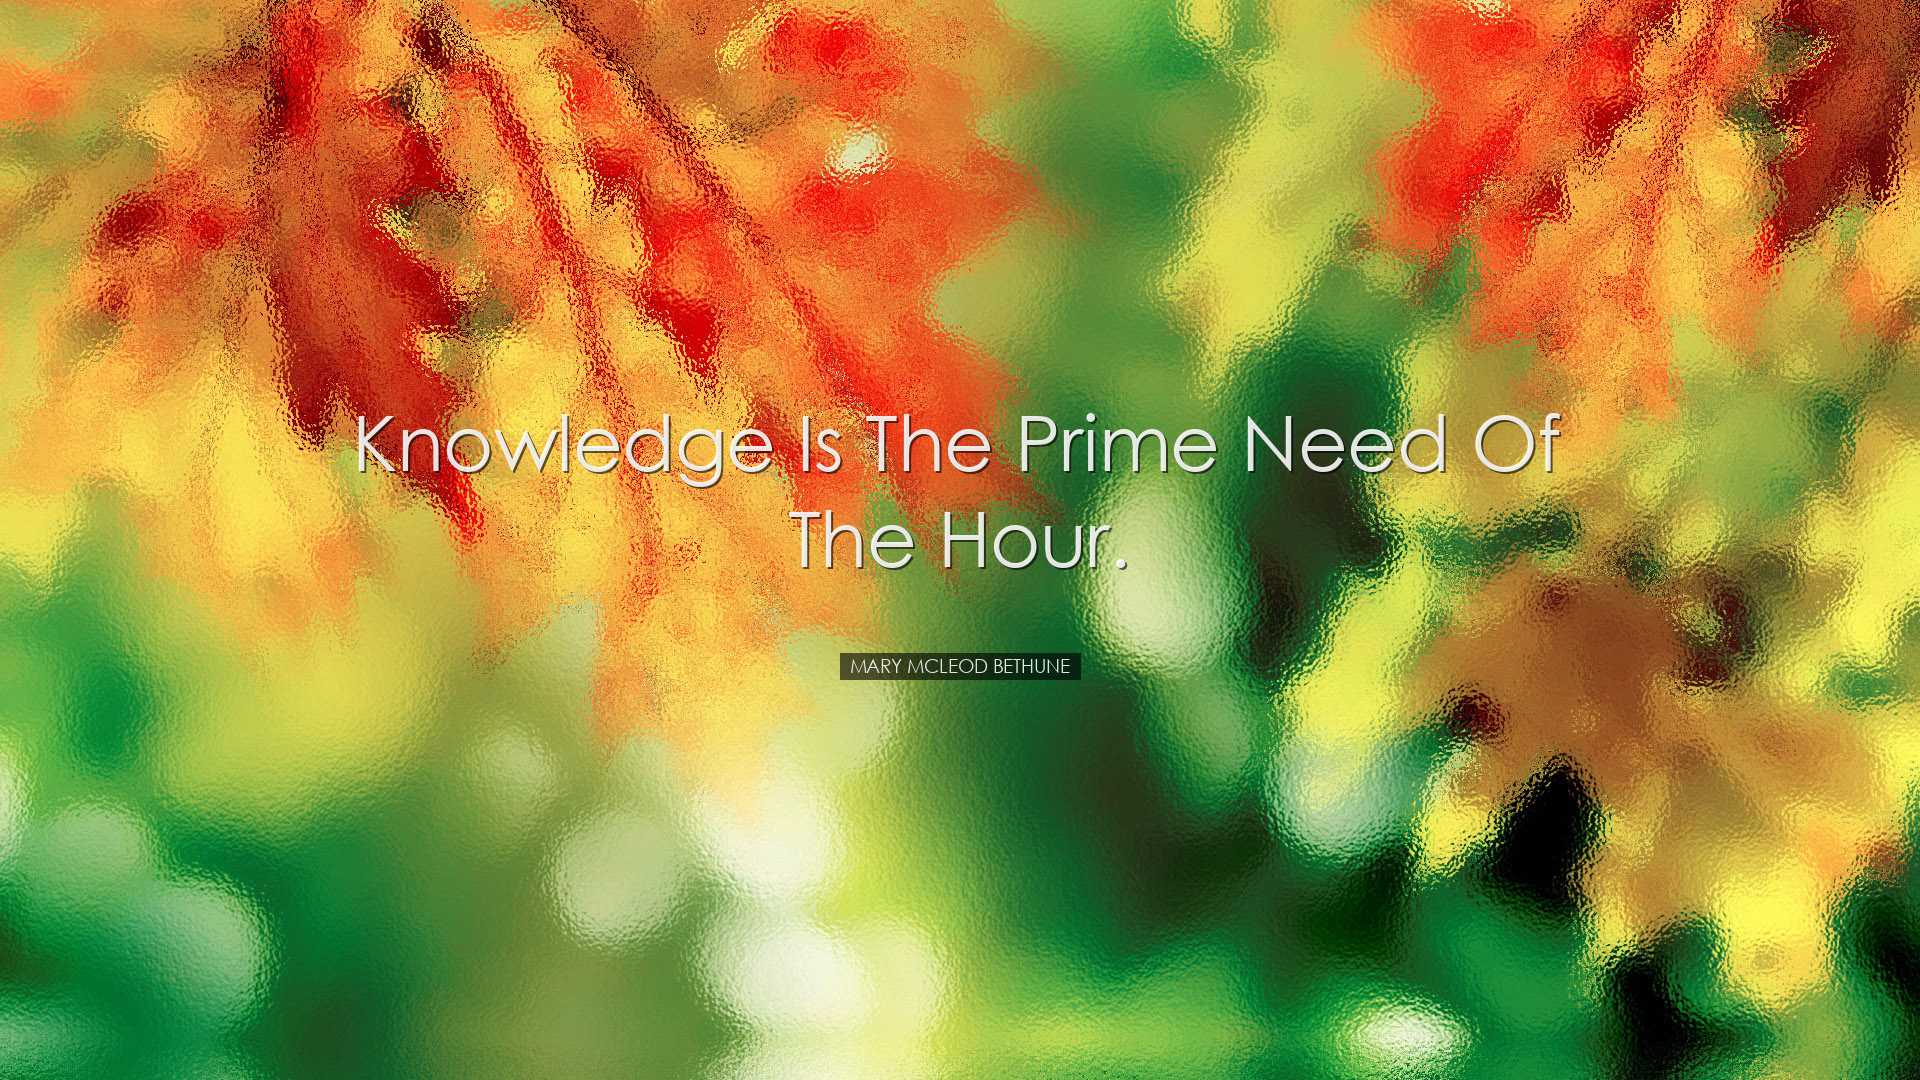 Knowledge is the prime need of the hour. - Mary McLeod Bethune